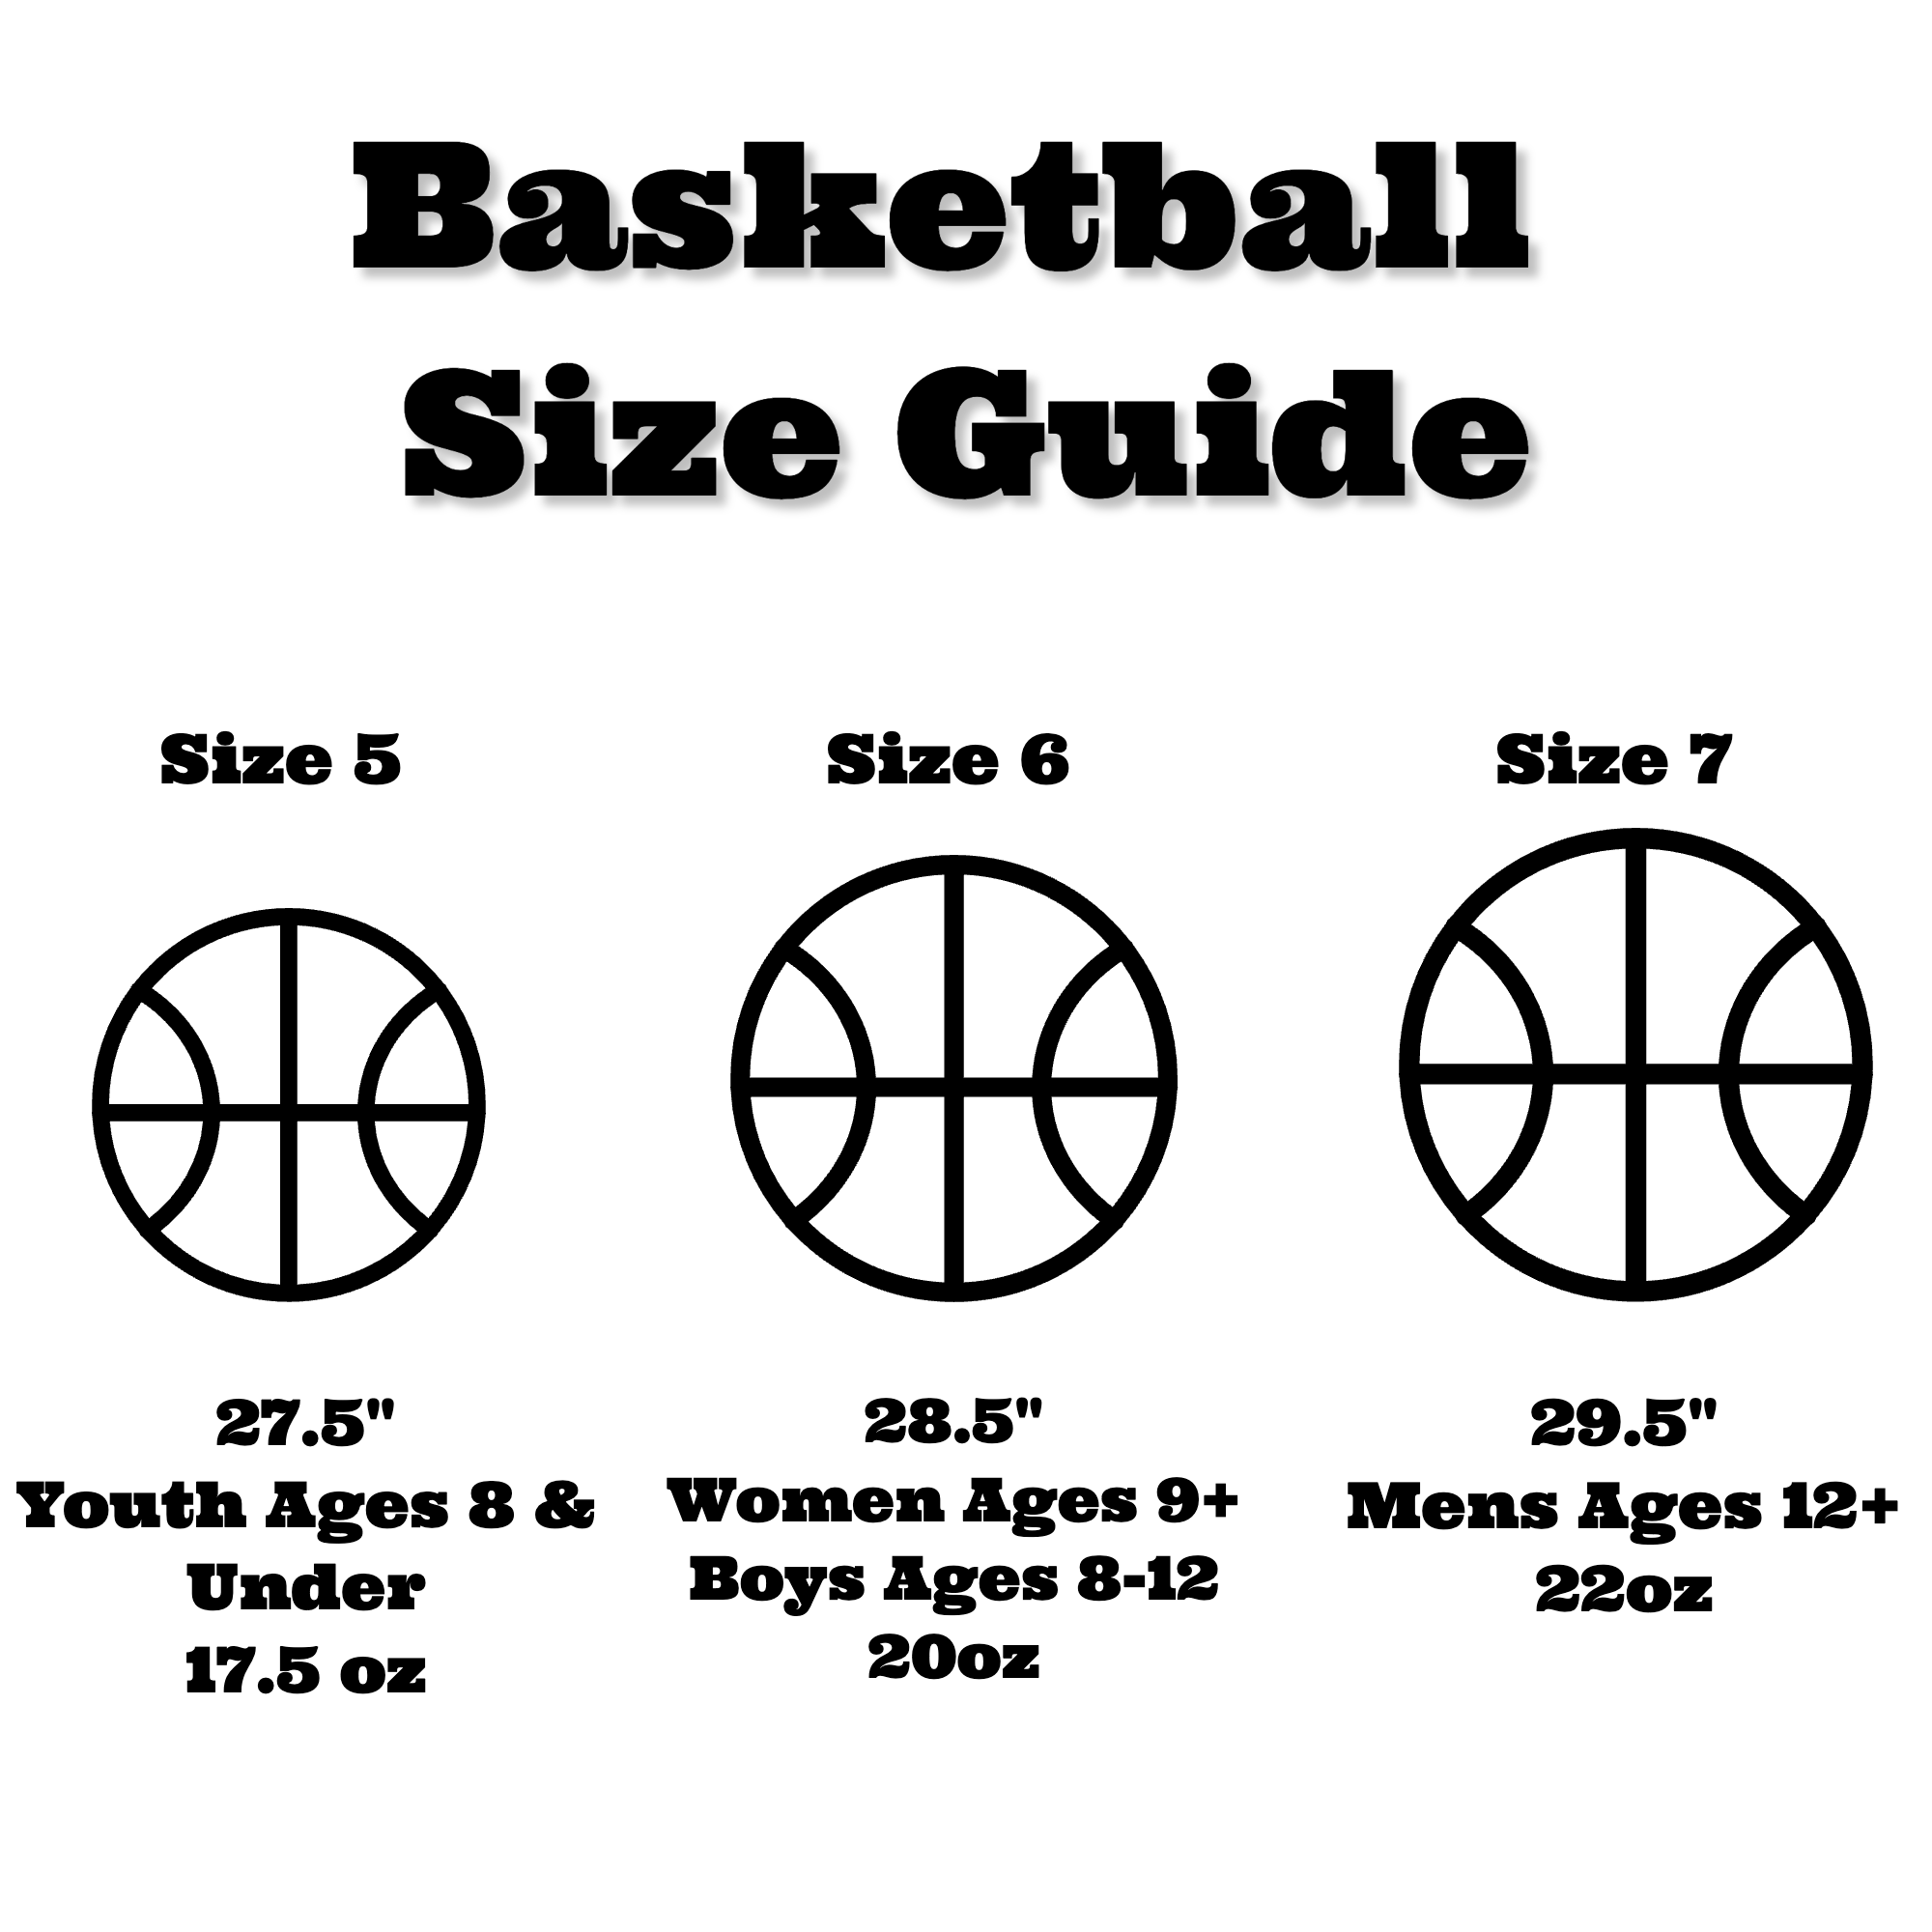 Guide To Basketball Sizes By Age & Gender